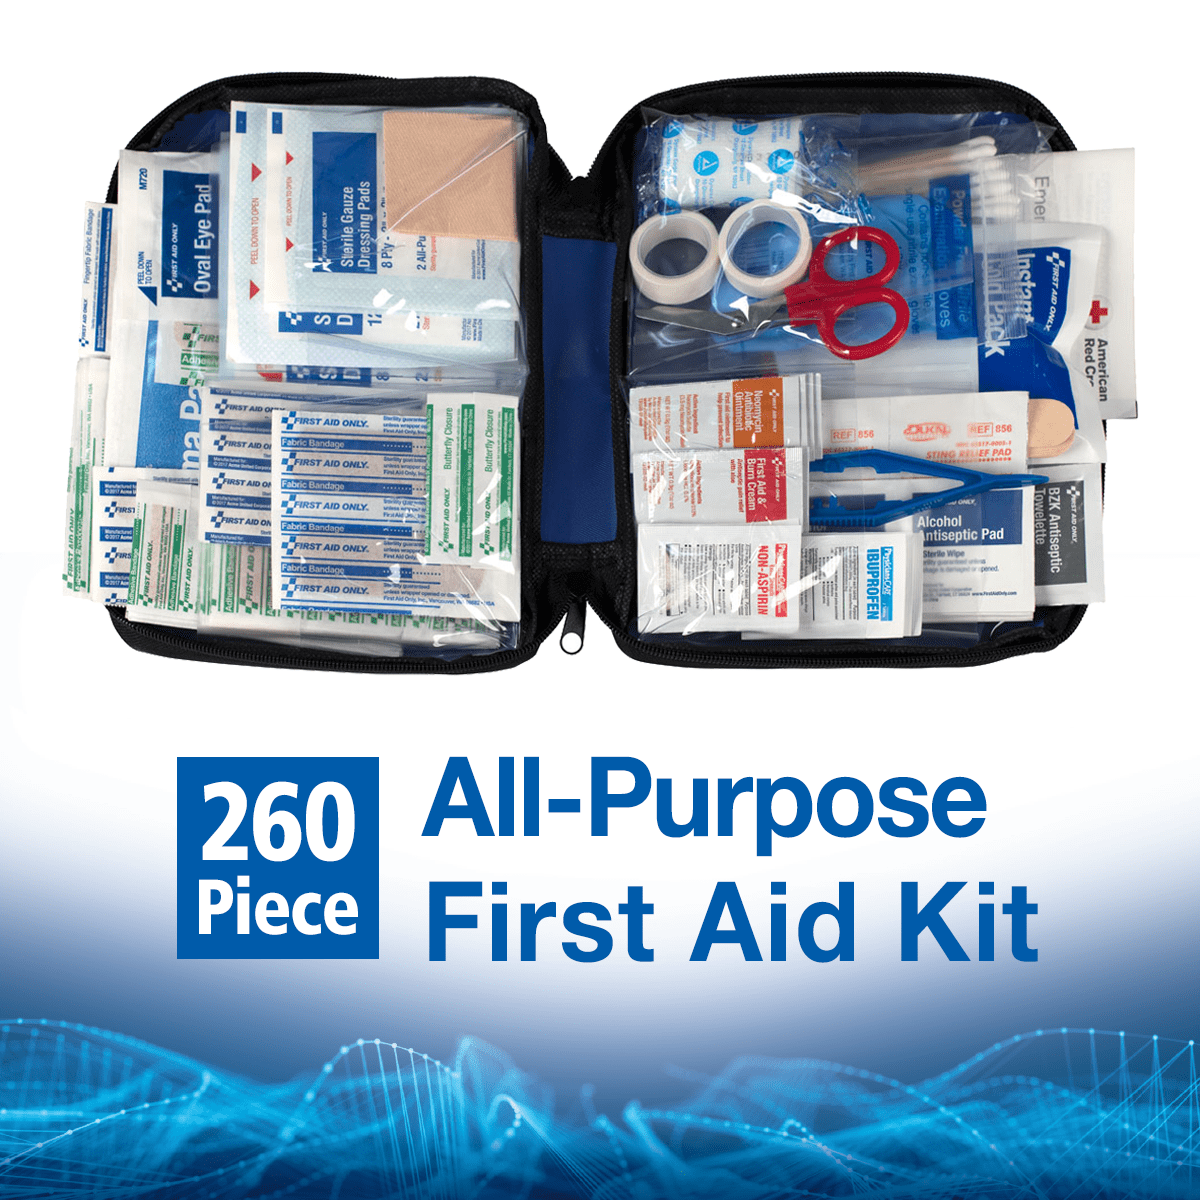 the first aid kit with a black travel pouch and travel-size medicines and essentials